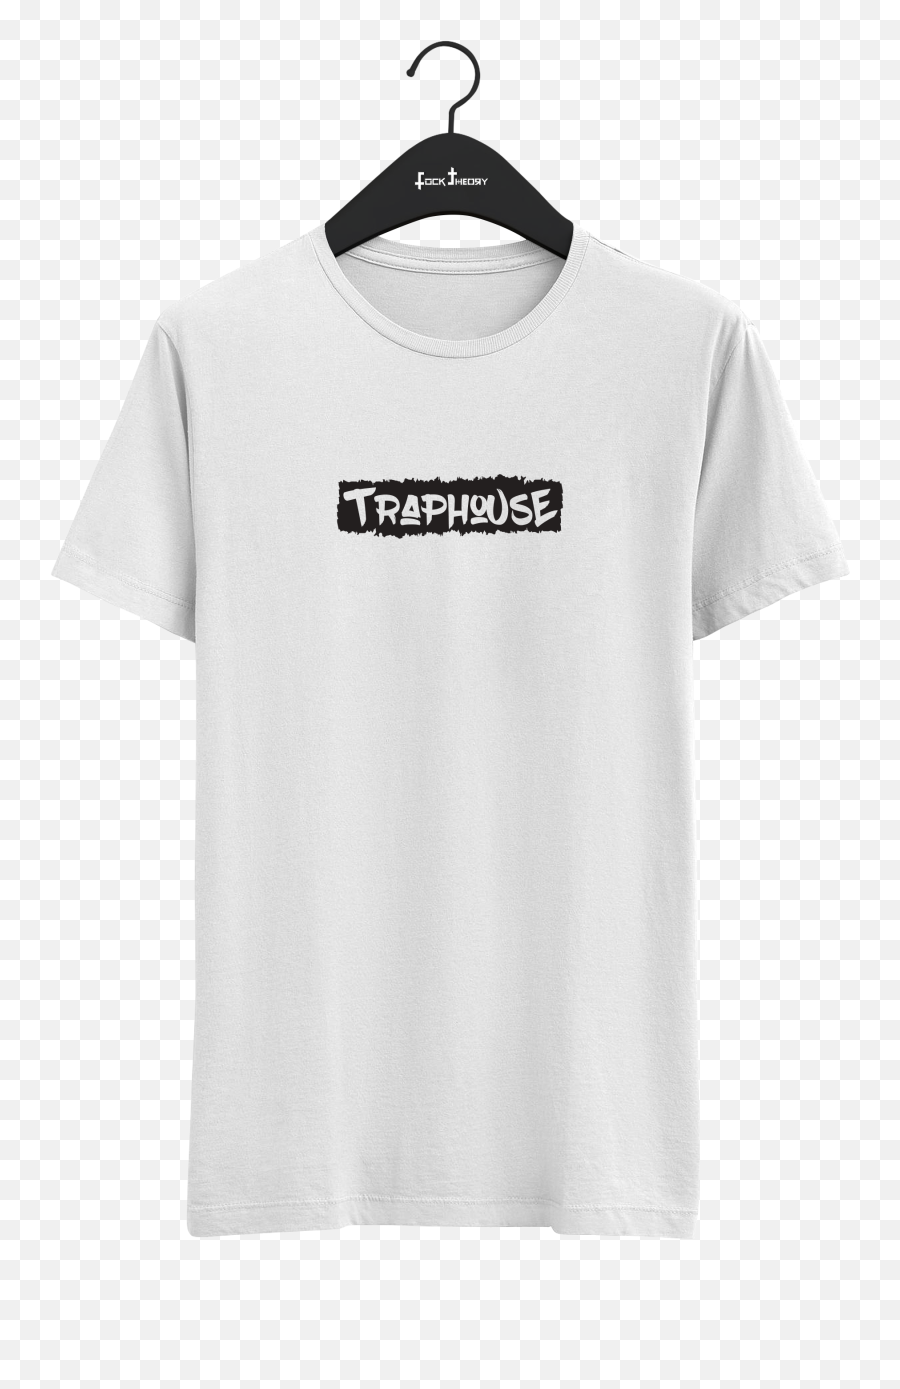 Download Traphouseu003cpu003e Unisex - Tshirt Full Size Png Active Shirt,Trap House Png